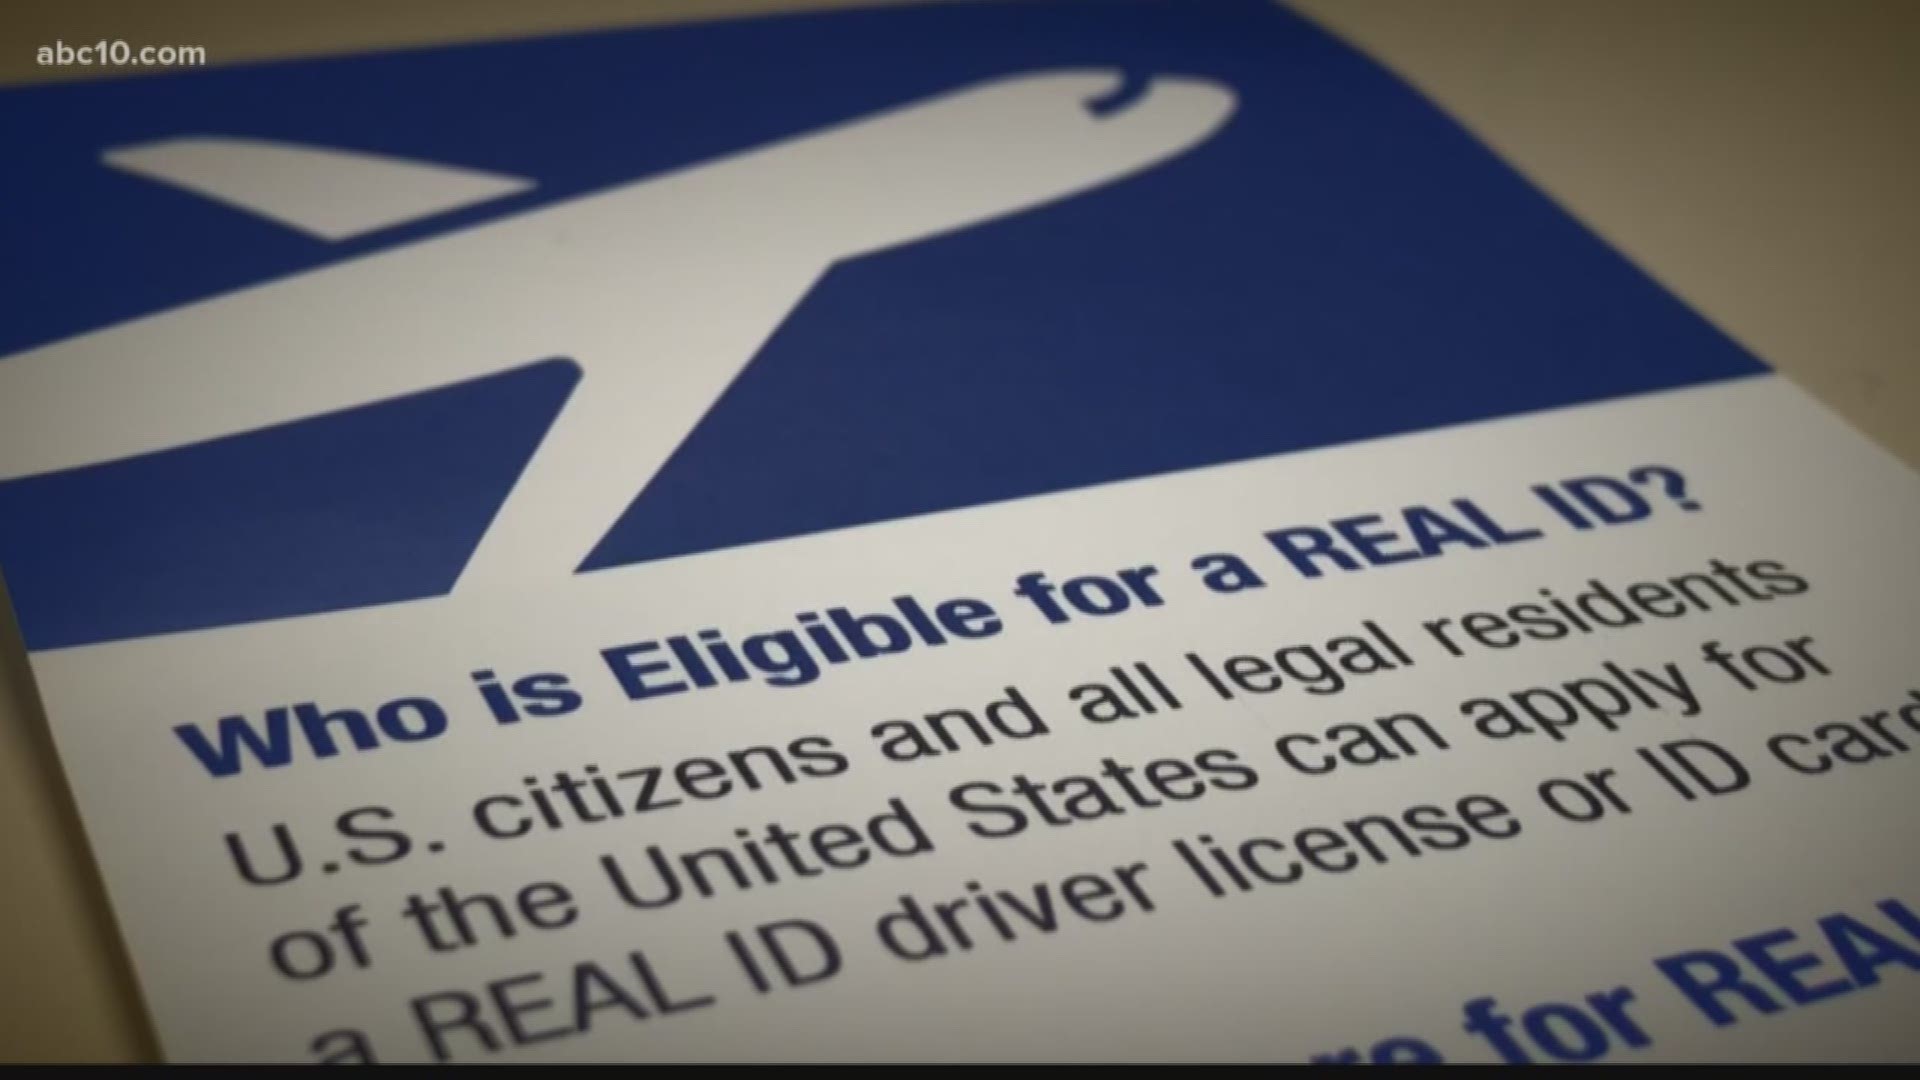 The deadline for getting a Real ID is Oct. 1, 2020.